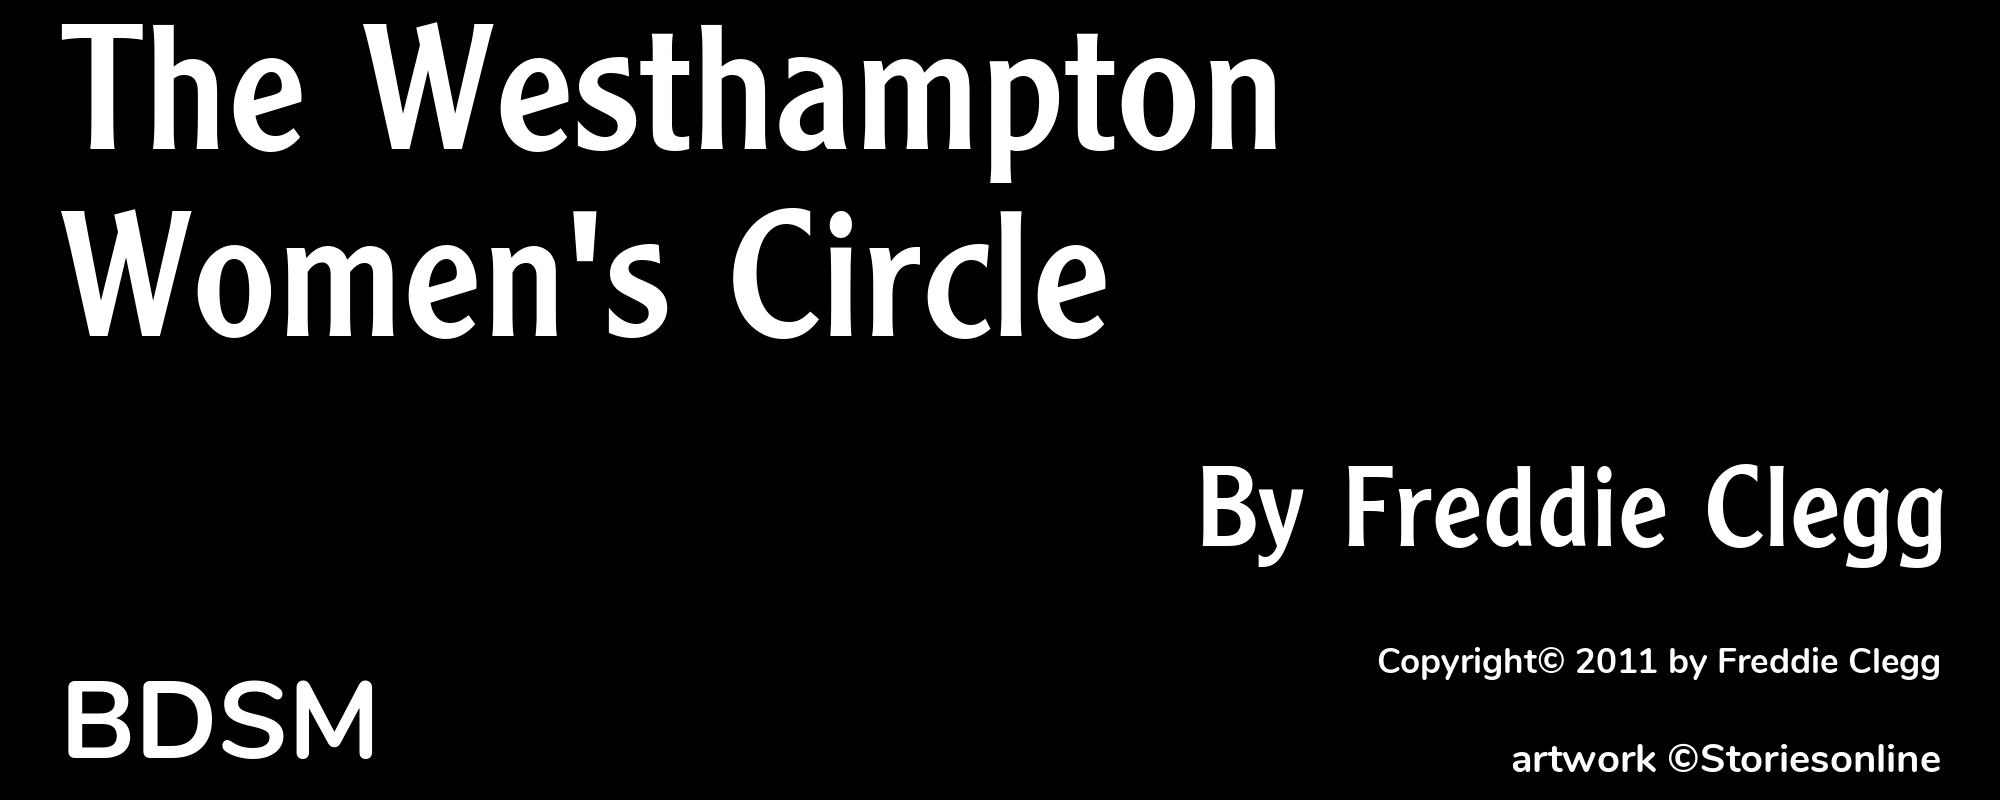 The Westhampton Women's Circle - Cover